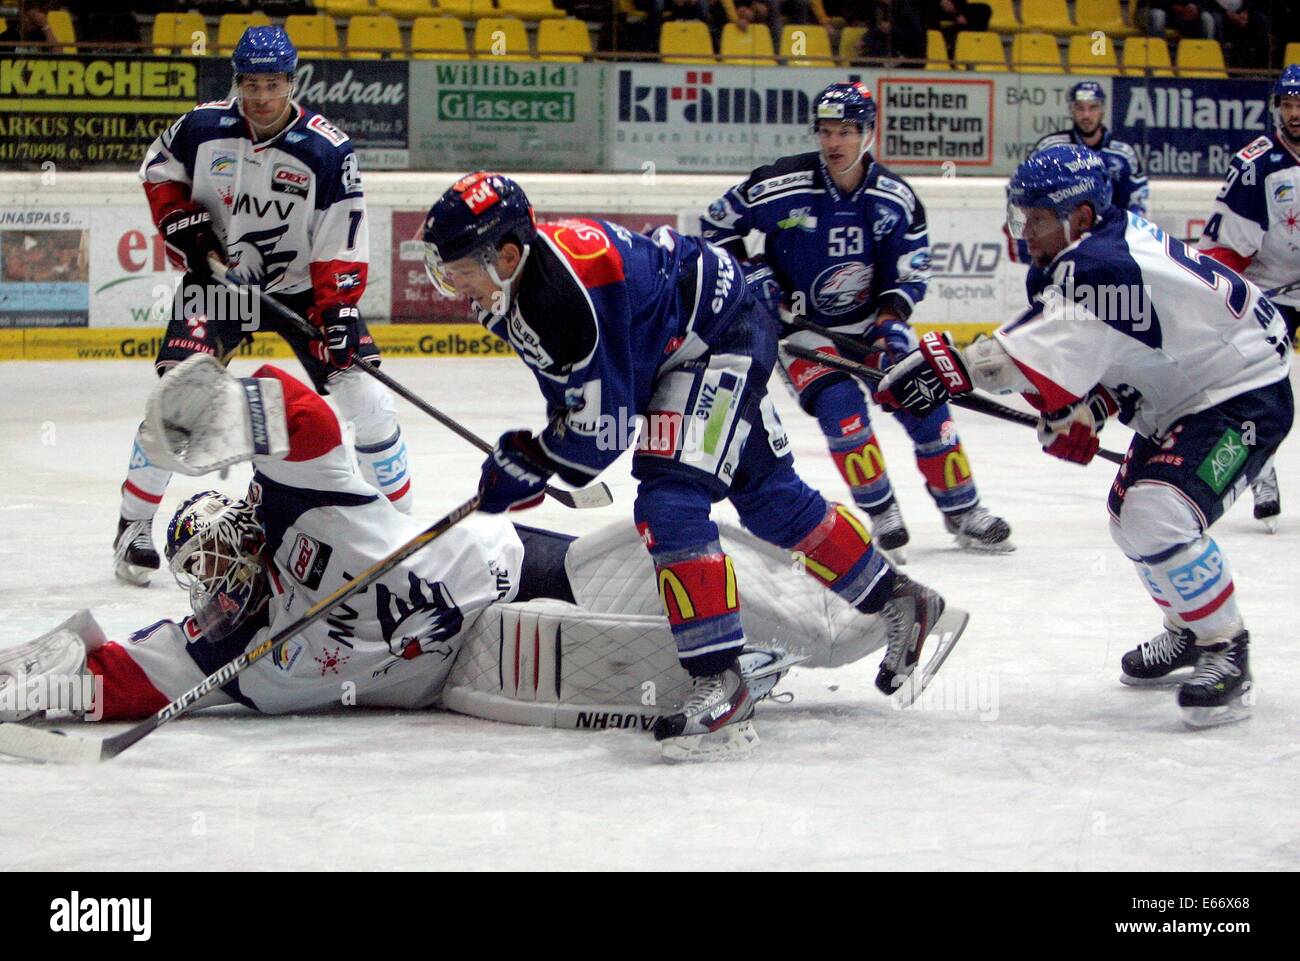 Bad Toelz, Bavaria, Germany. 15th Aug, 2014. from left in front Dennis ENDRAS Mannheim, Patrick GEERING/Zuerich, Ronny ARENDT/Mannheim, .two top teams from Germany and Switzerland meet for a ice hockey friendly as preparation for the season, ZSC Lions Zuerich vs Adler Mannheim, August 15, 2014, Bad Toelz, Germany, from left Credit:  Wolfgang Fehrmann/Wolfgang Fehrmann/ZUMA Wire/Alamy Live News Stock Photo